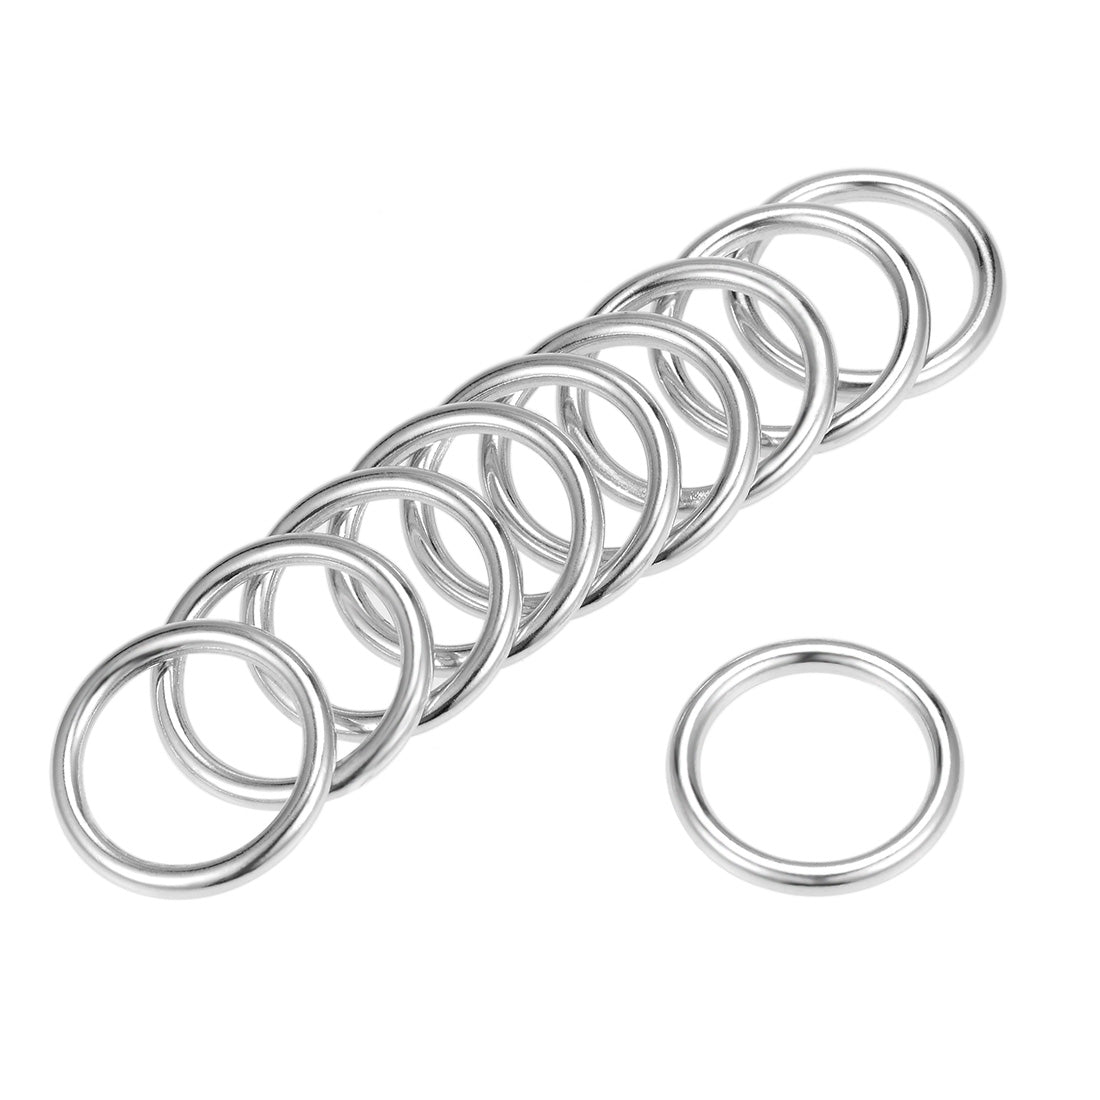 uxcell Uxcell O Ring Buckle 20mm(0.8") ID 3mm Thickness Zinc Alloy O-Rings for Hardware Bags Belts Craft DIY Accessories, Silver Tone 25pcs